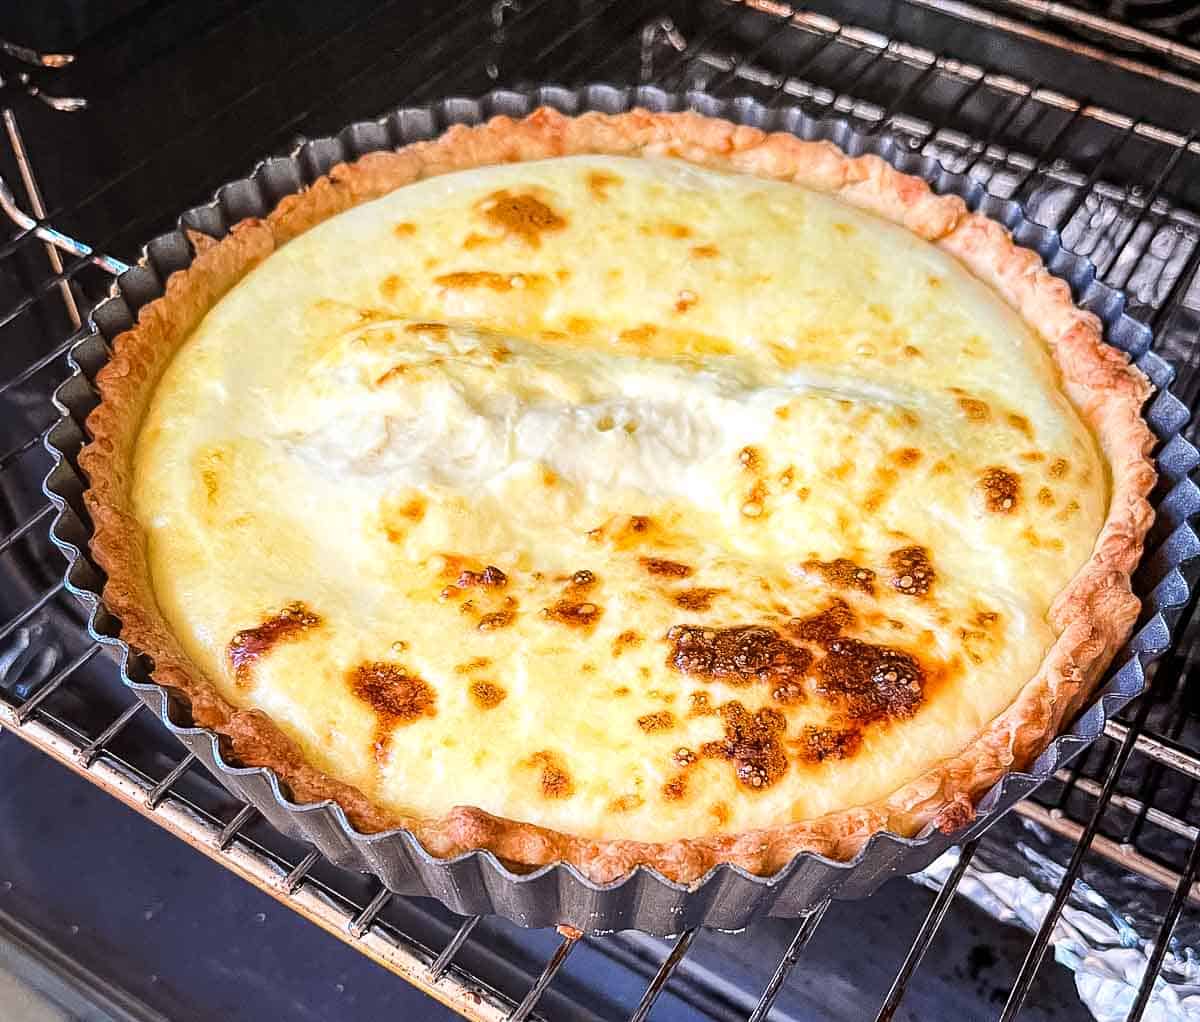 partially cooked cheese flan in oven